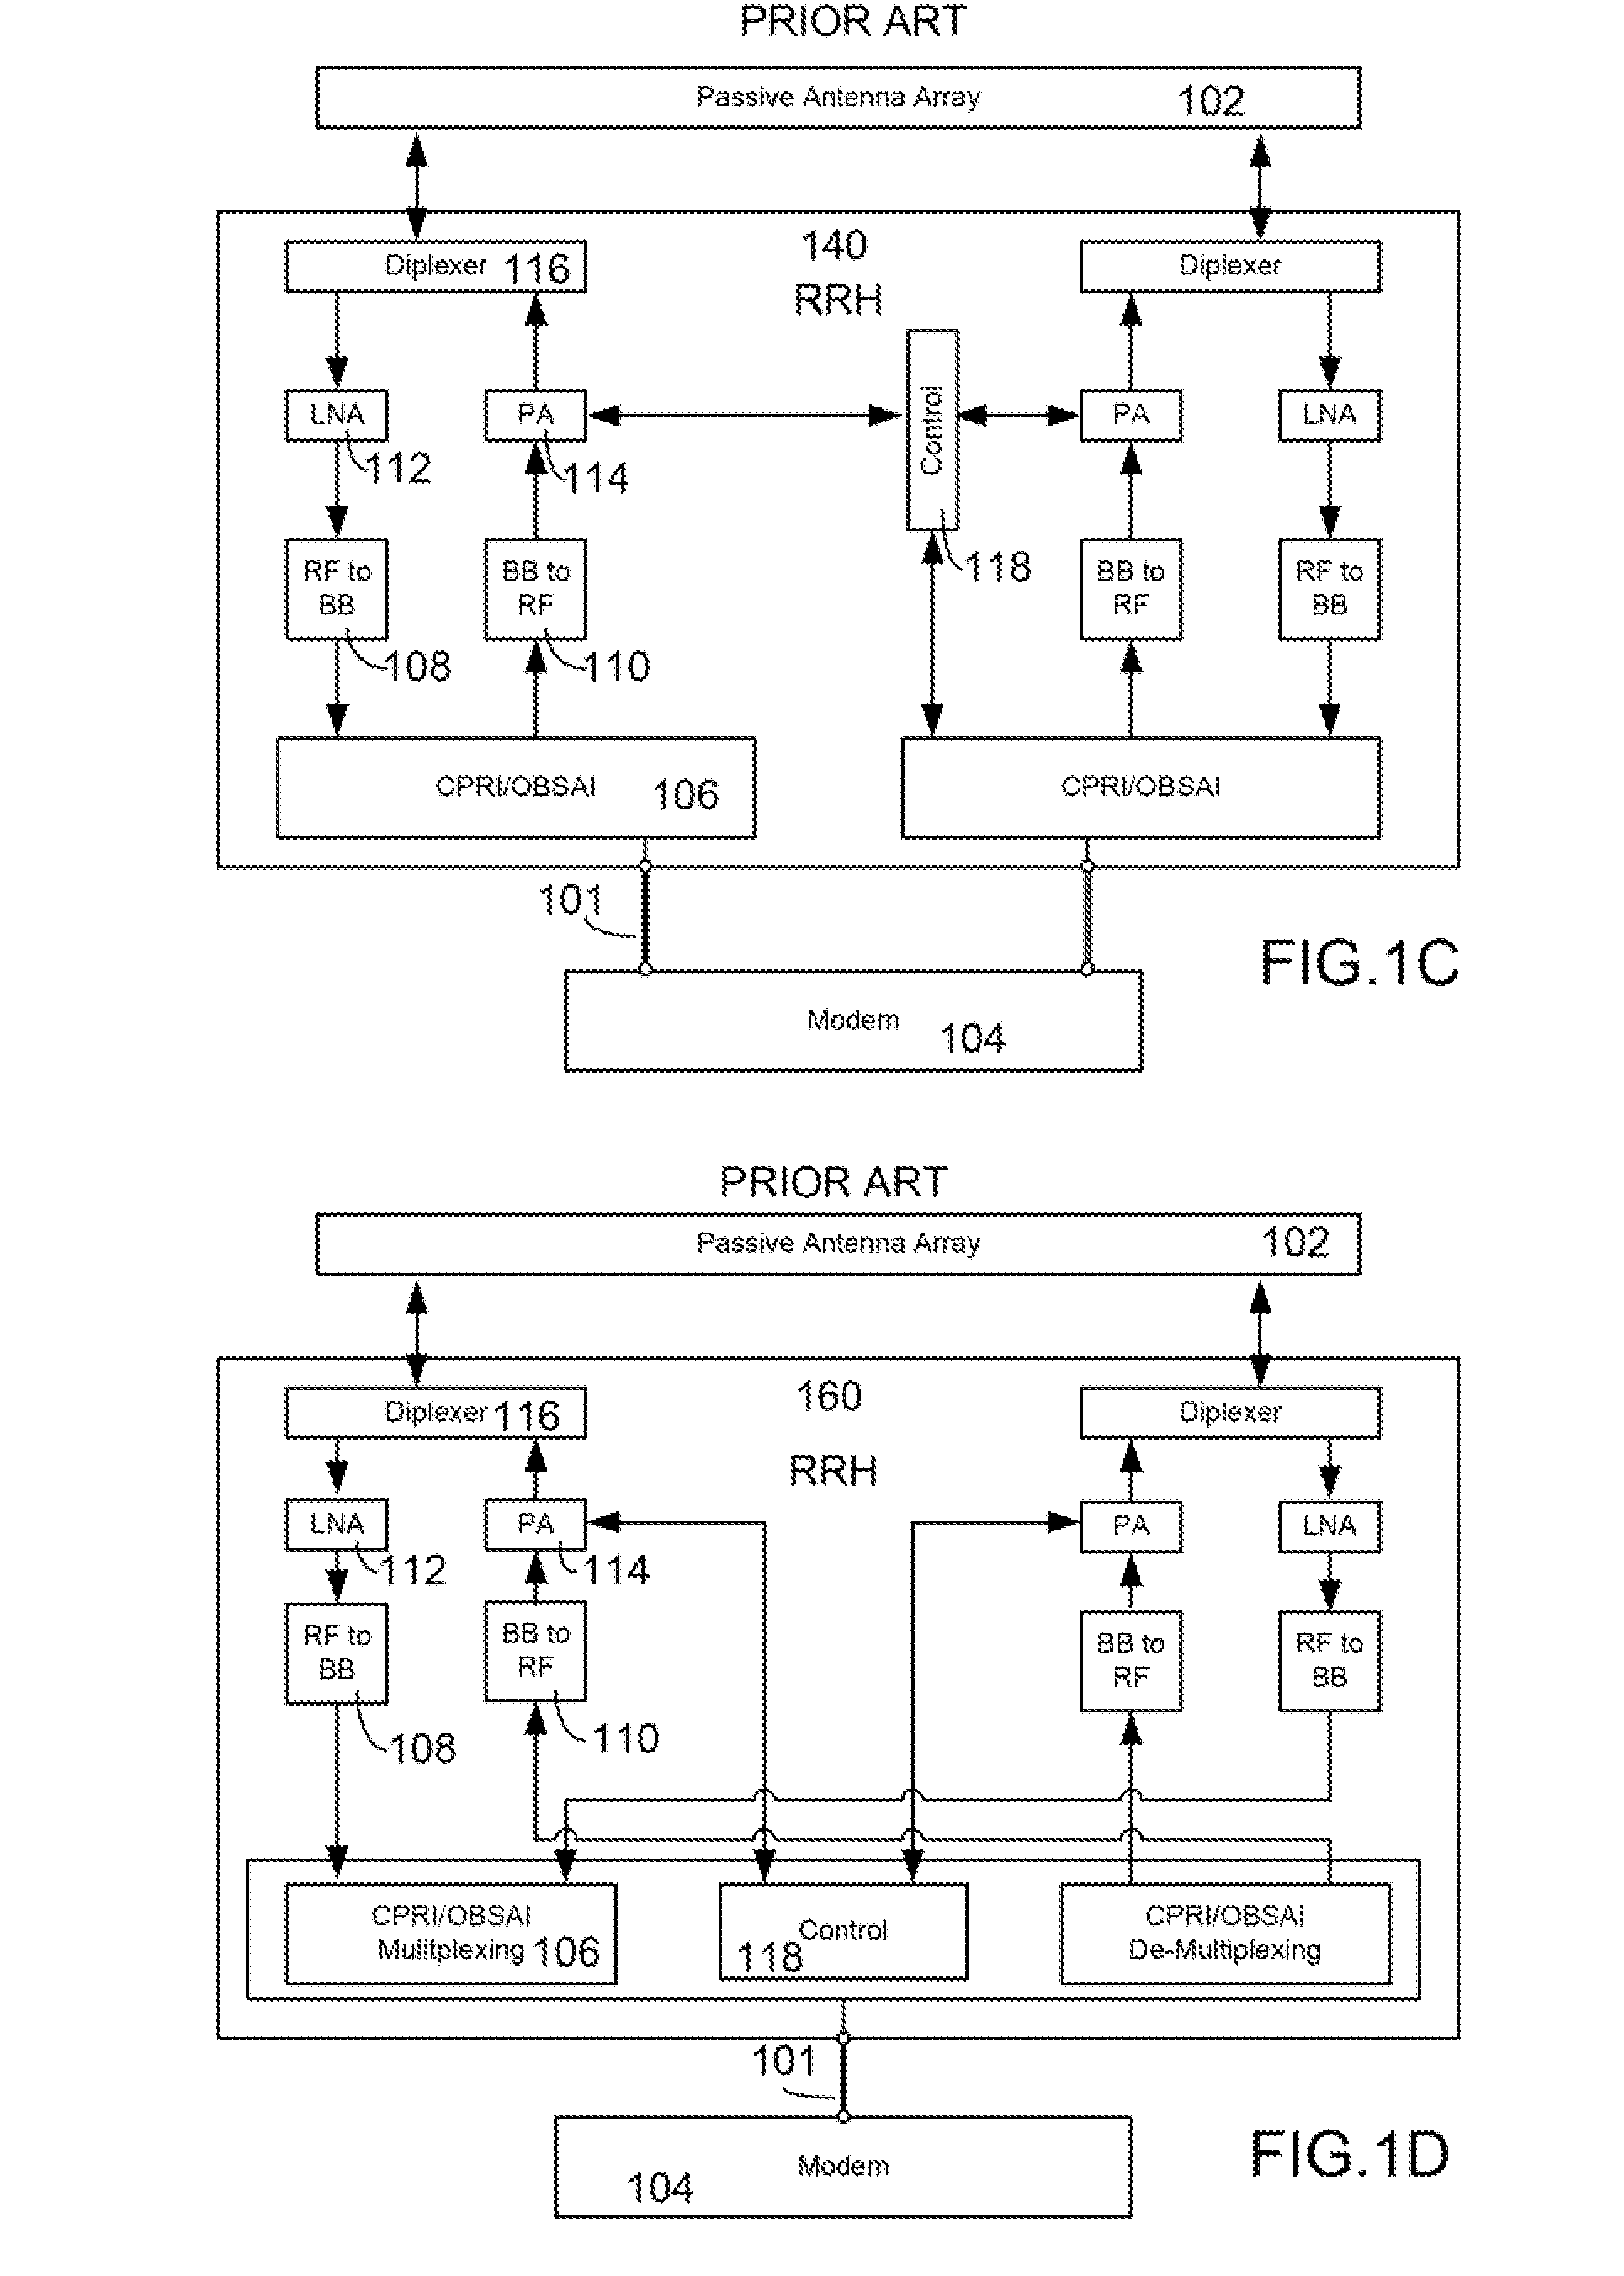 Digital integrated antenna array for enhancing coverage and capacity of a wireless network